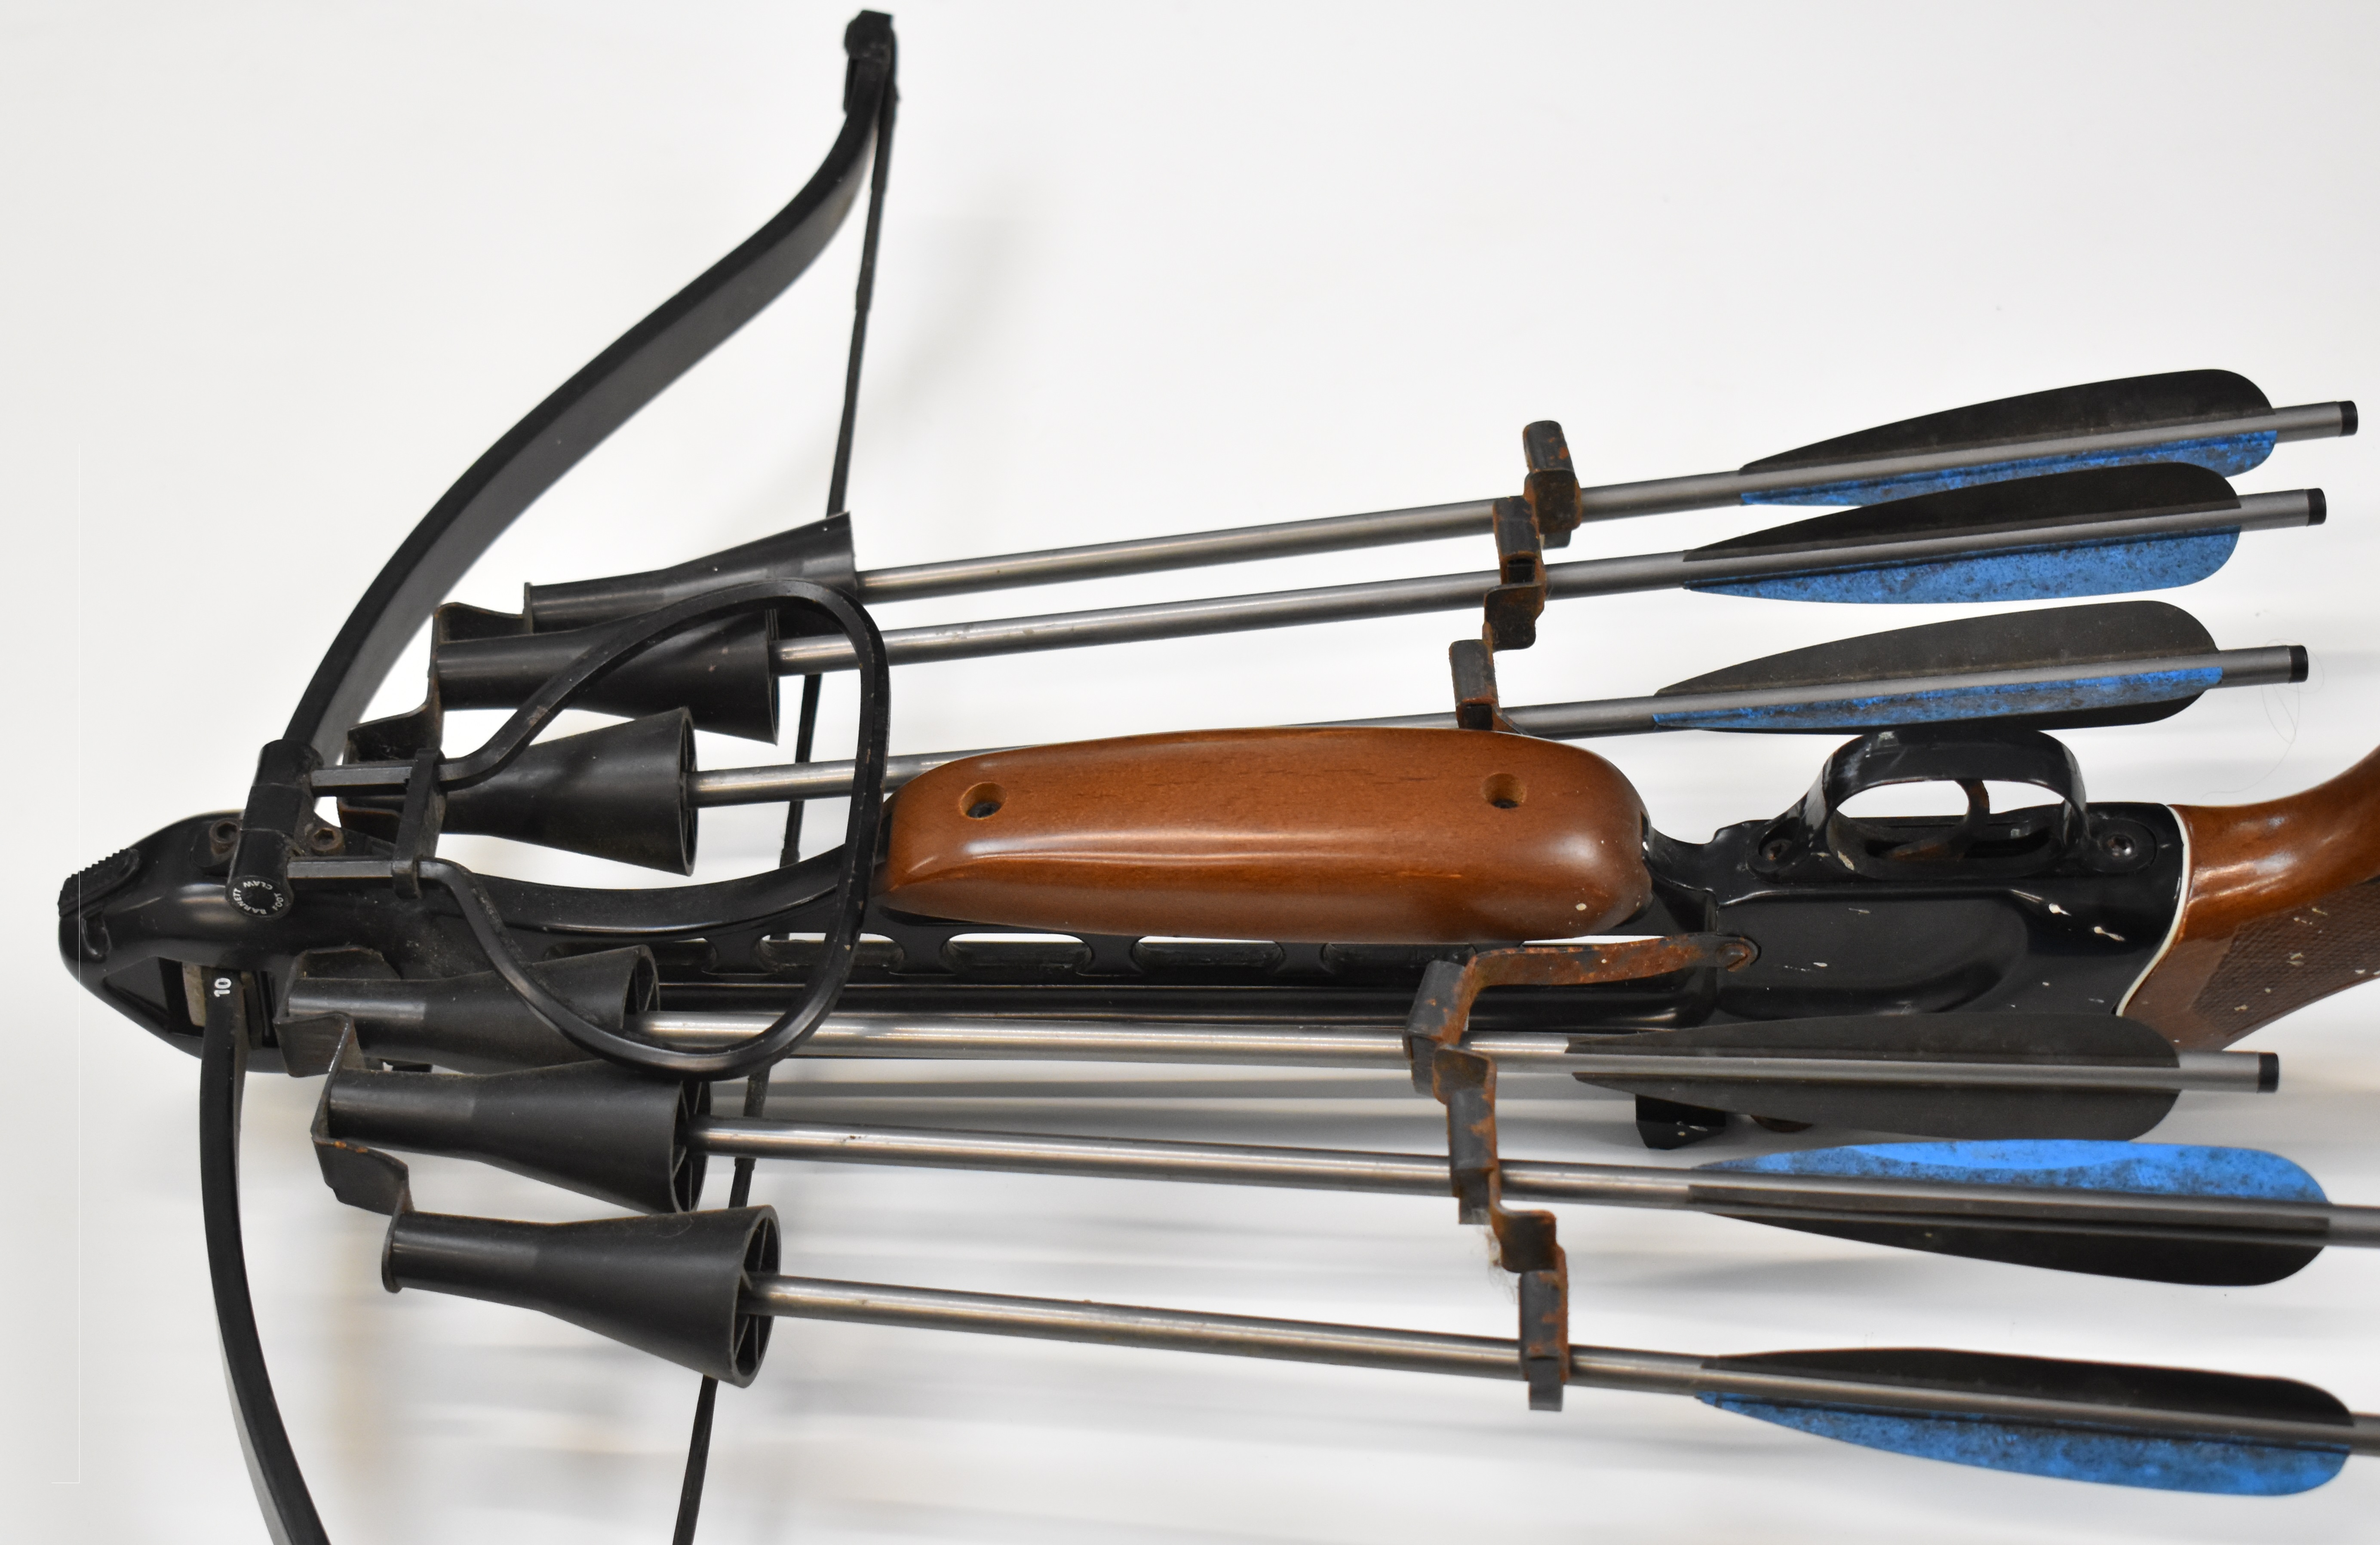 Barnett crossbow with chequered semi-pistol grip, adjustable sights and bolt holder, with 18 bolts - Image 5 of 5